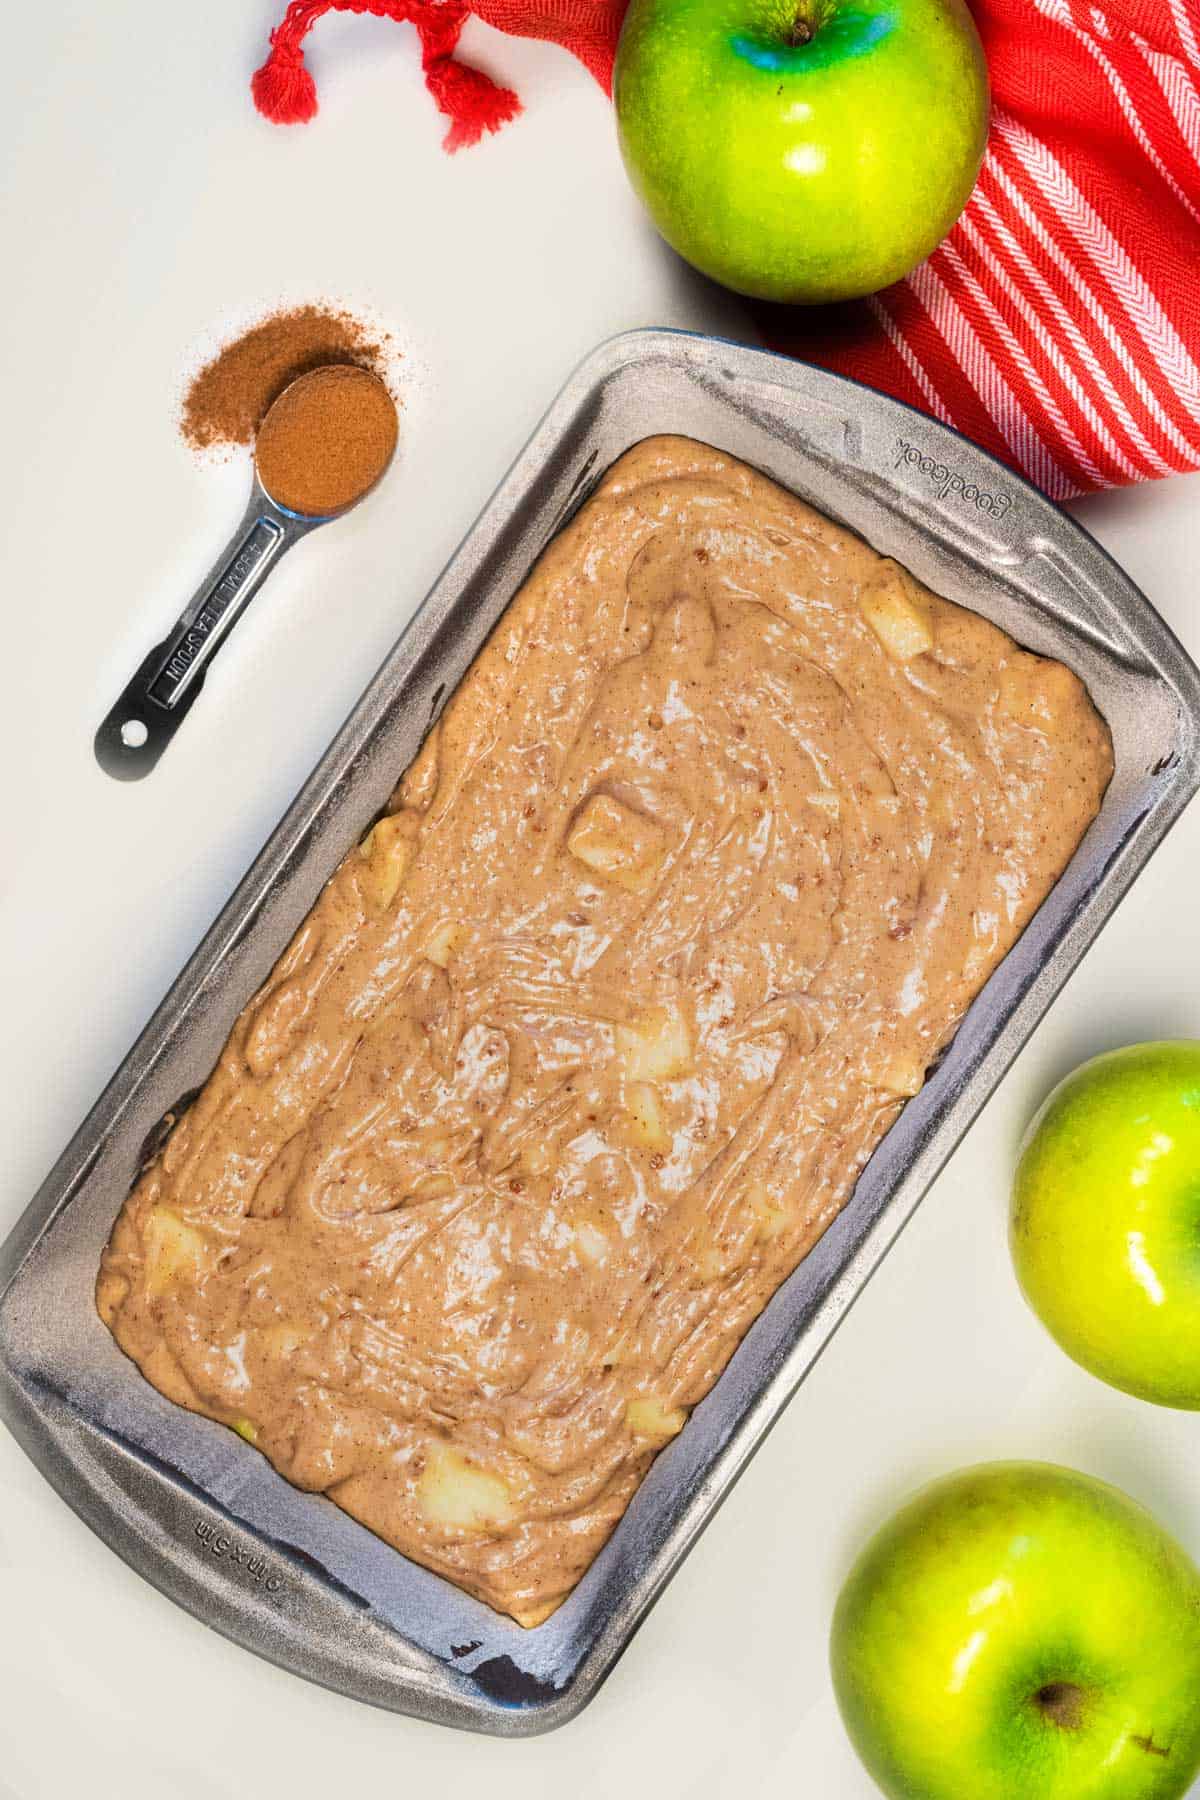 A pan of apple cinnamon loaf batter ready to be baked with a teaspoon of cinnamon and green apples next to it.